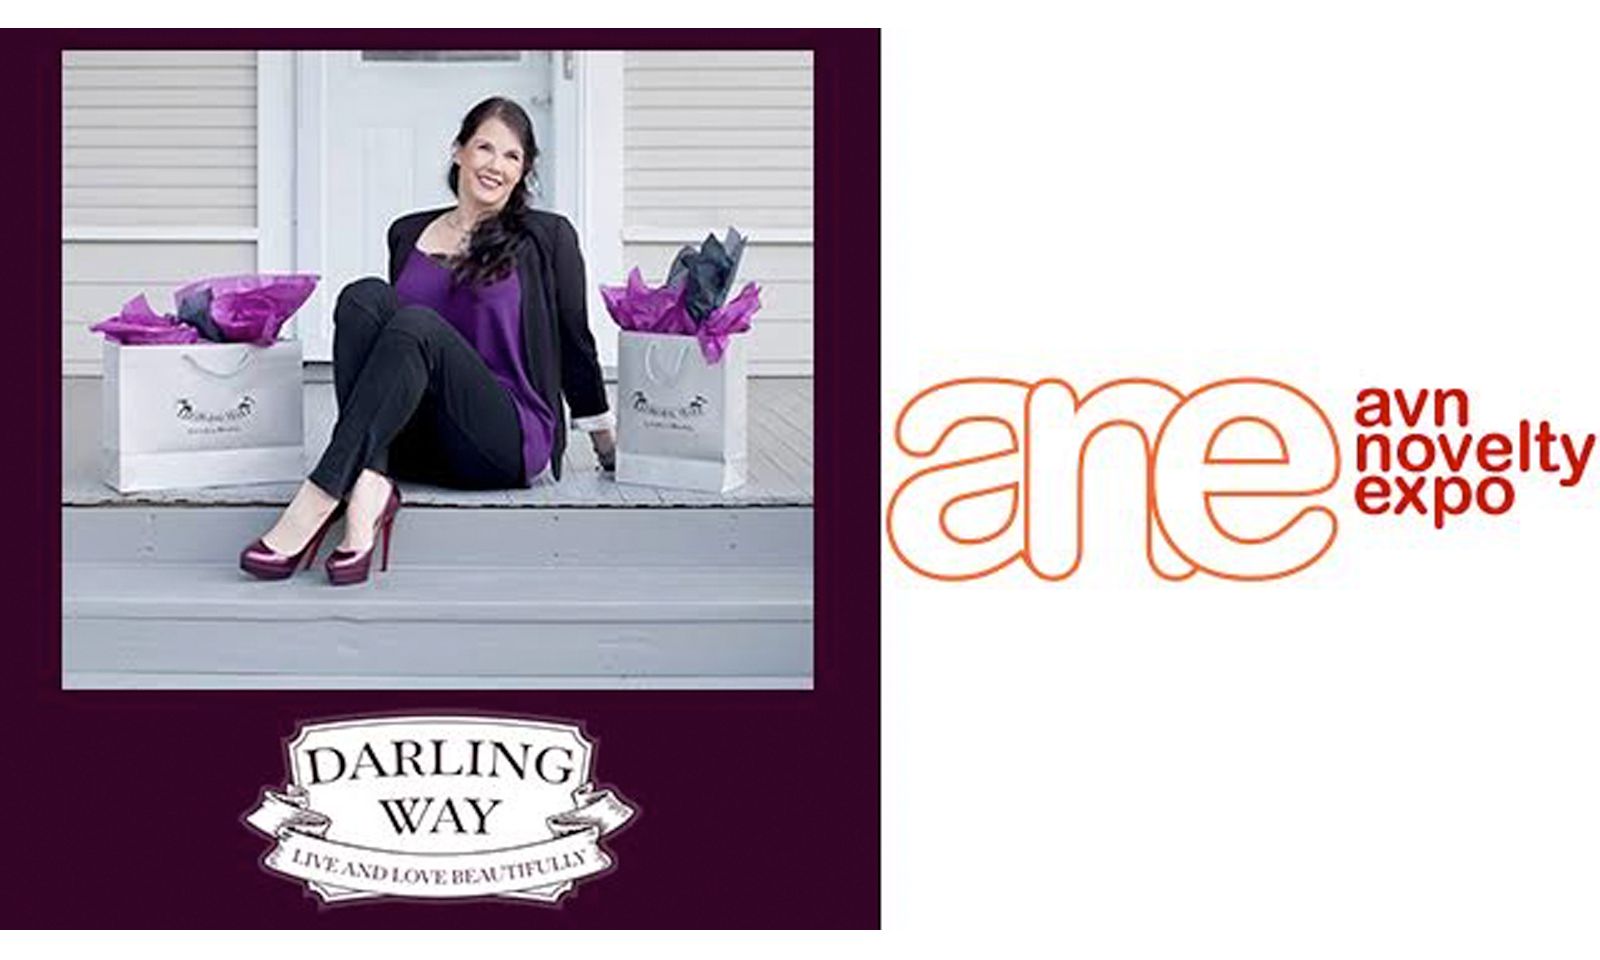 Darling Way Founder Beth Liebling to Speak at AVN Novelty Expo